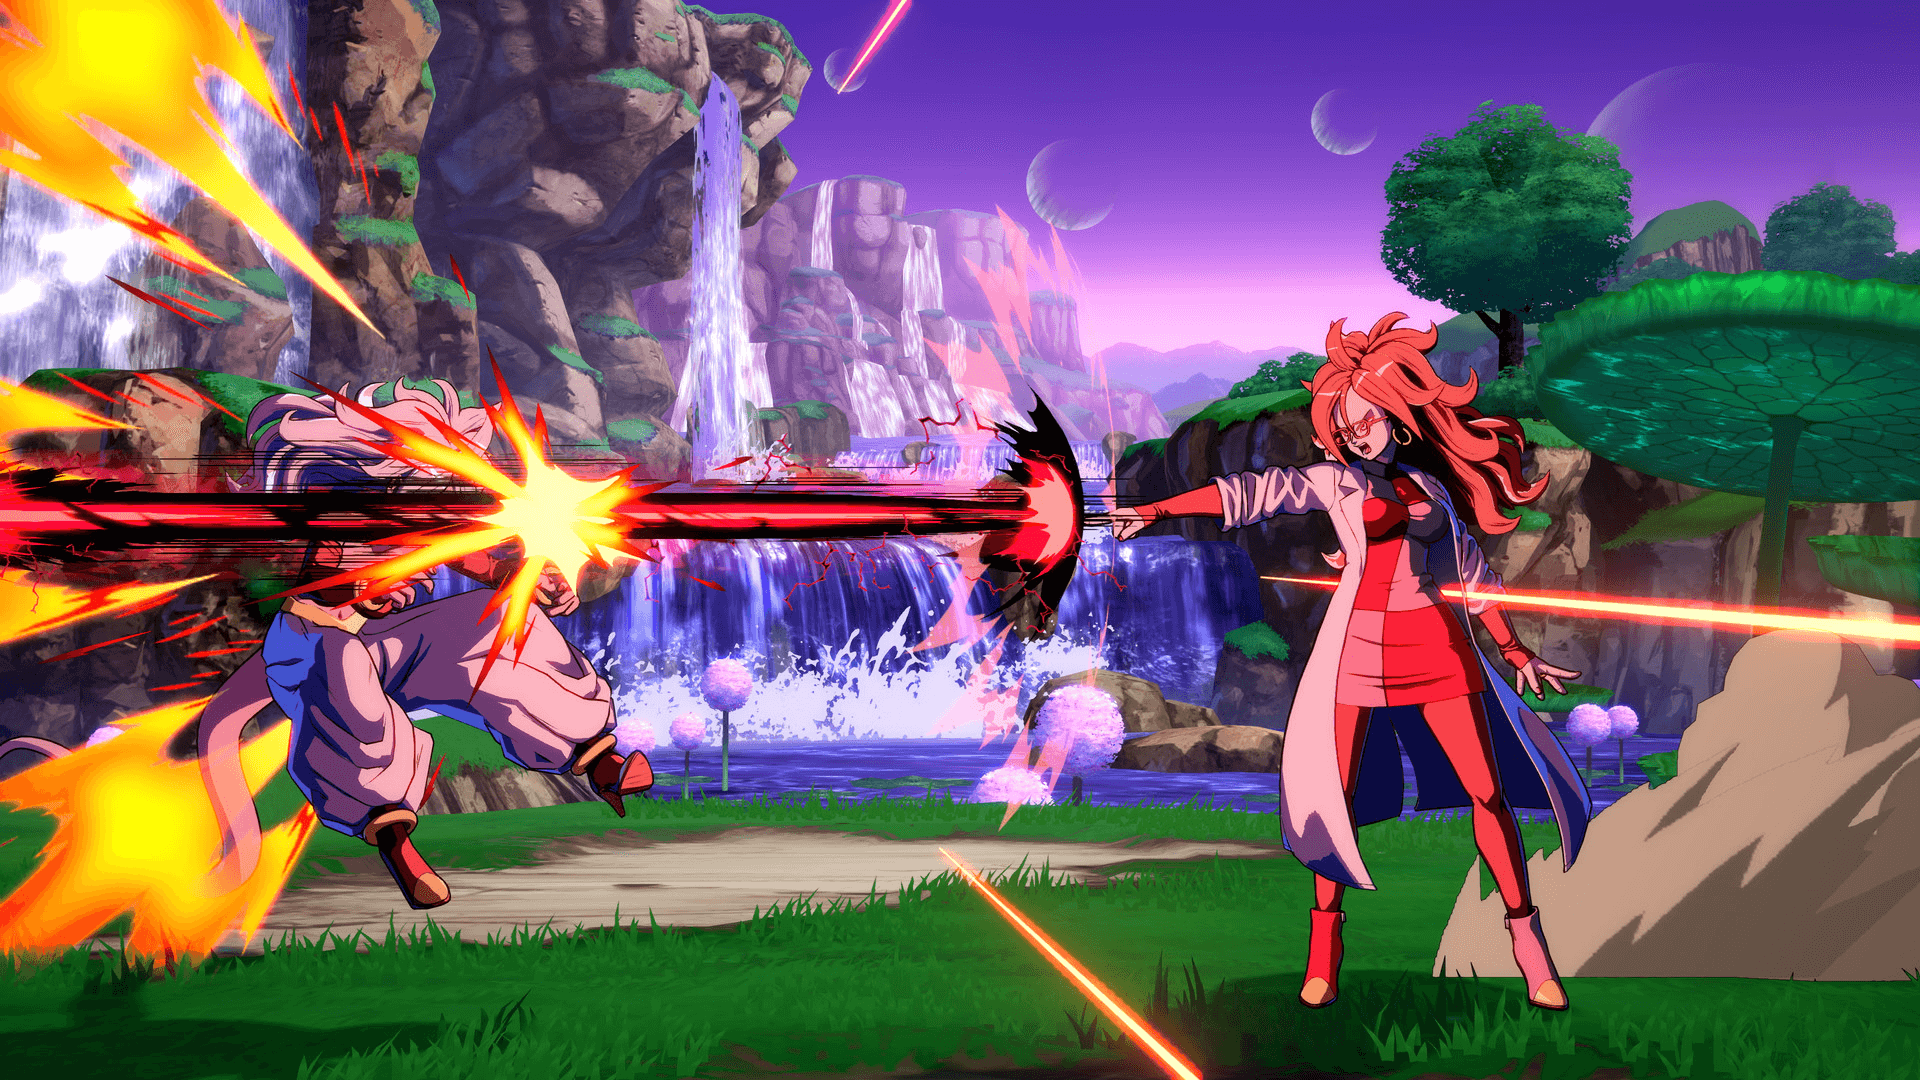 Android 21 (Lab Coat) Already Fights in DBFZ